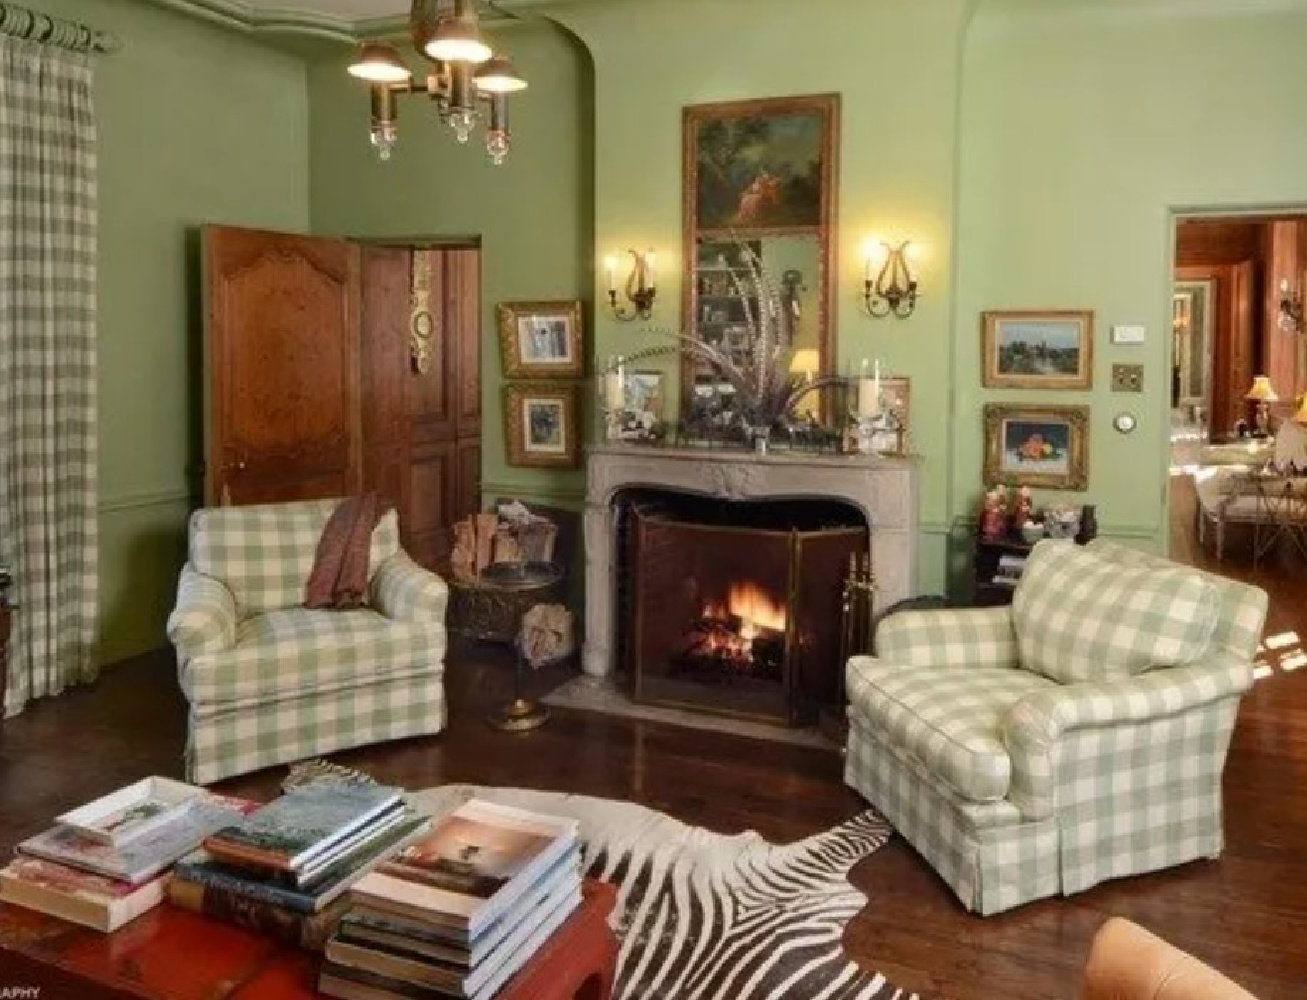 Light green on walls and check furnishings. David Adler La Lanterne Mansion is a 1922 historic home in Lake Bluff with French inspired architecture and interiors.